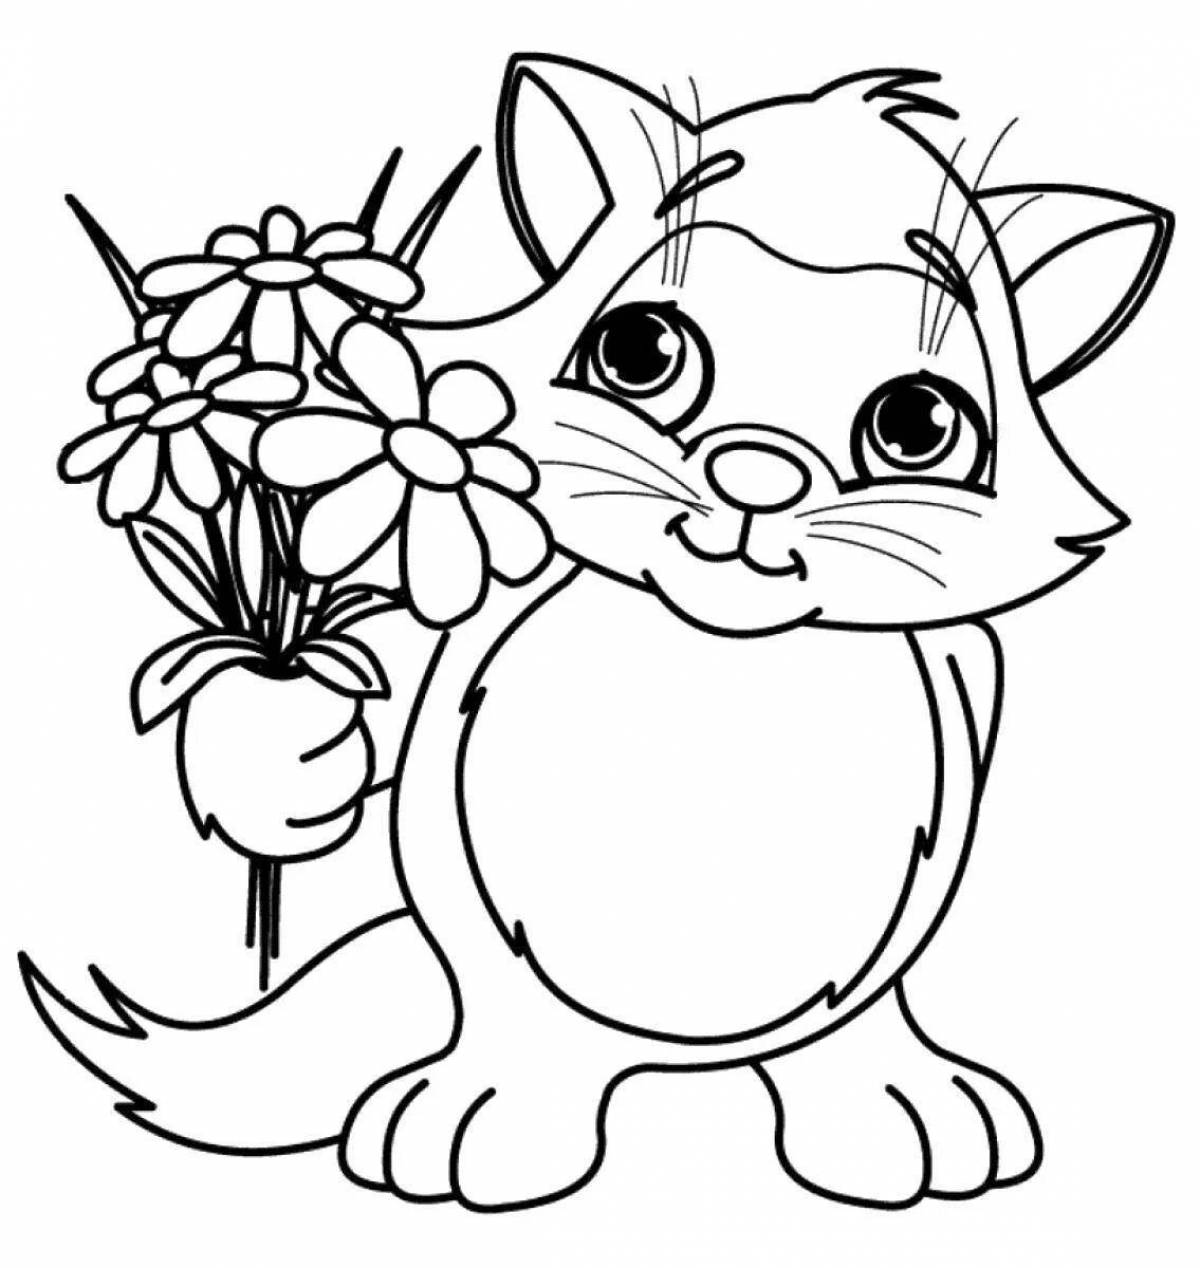 Blissful cat coloring page